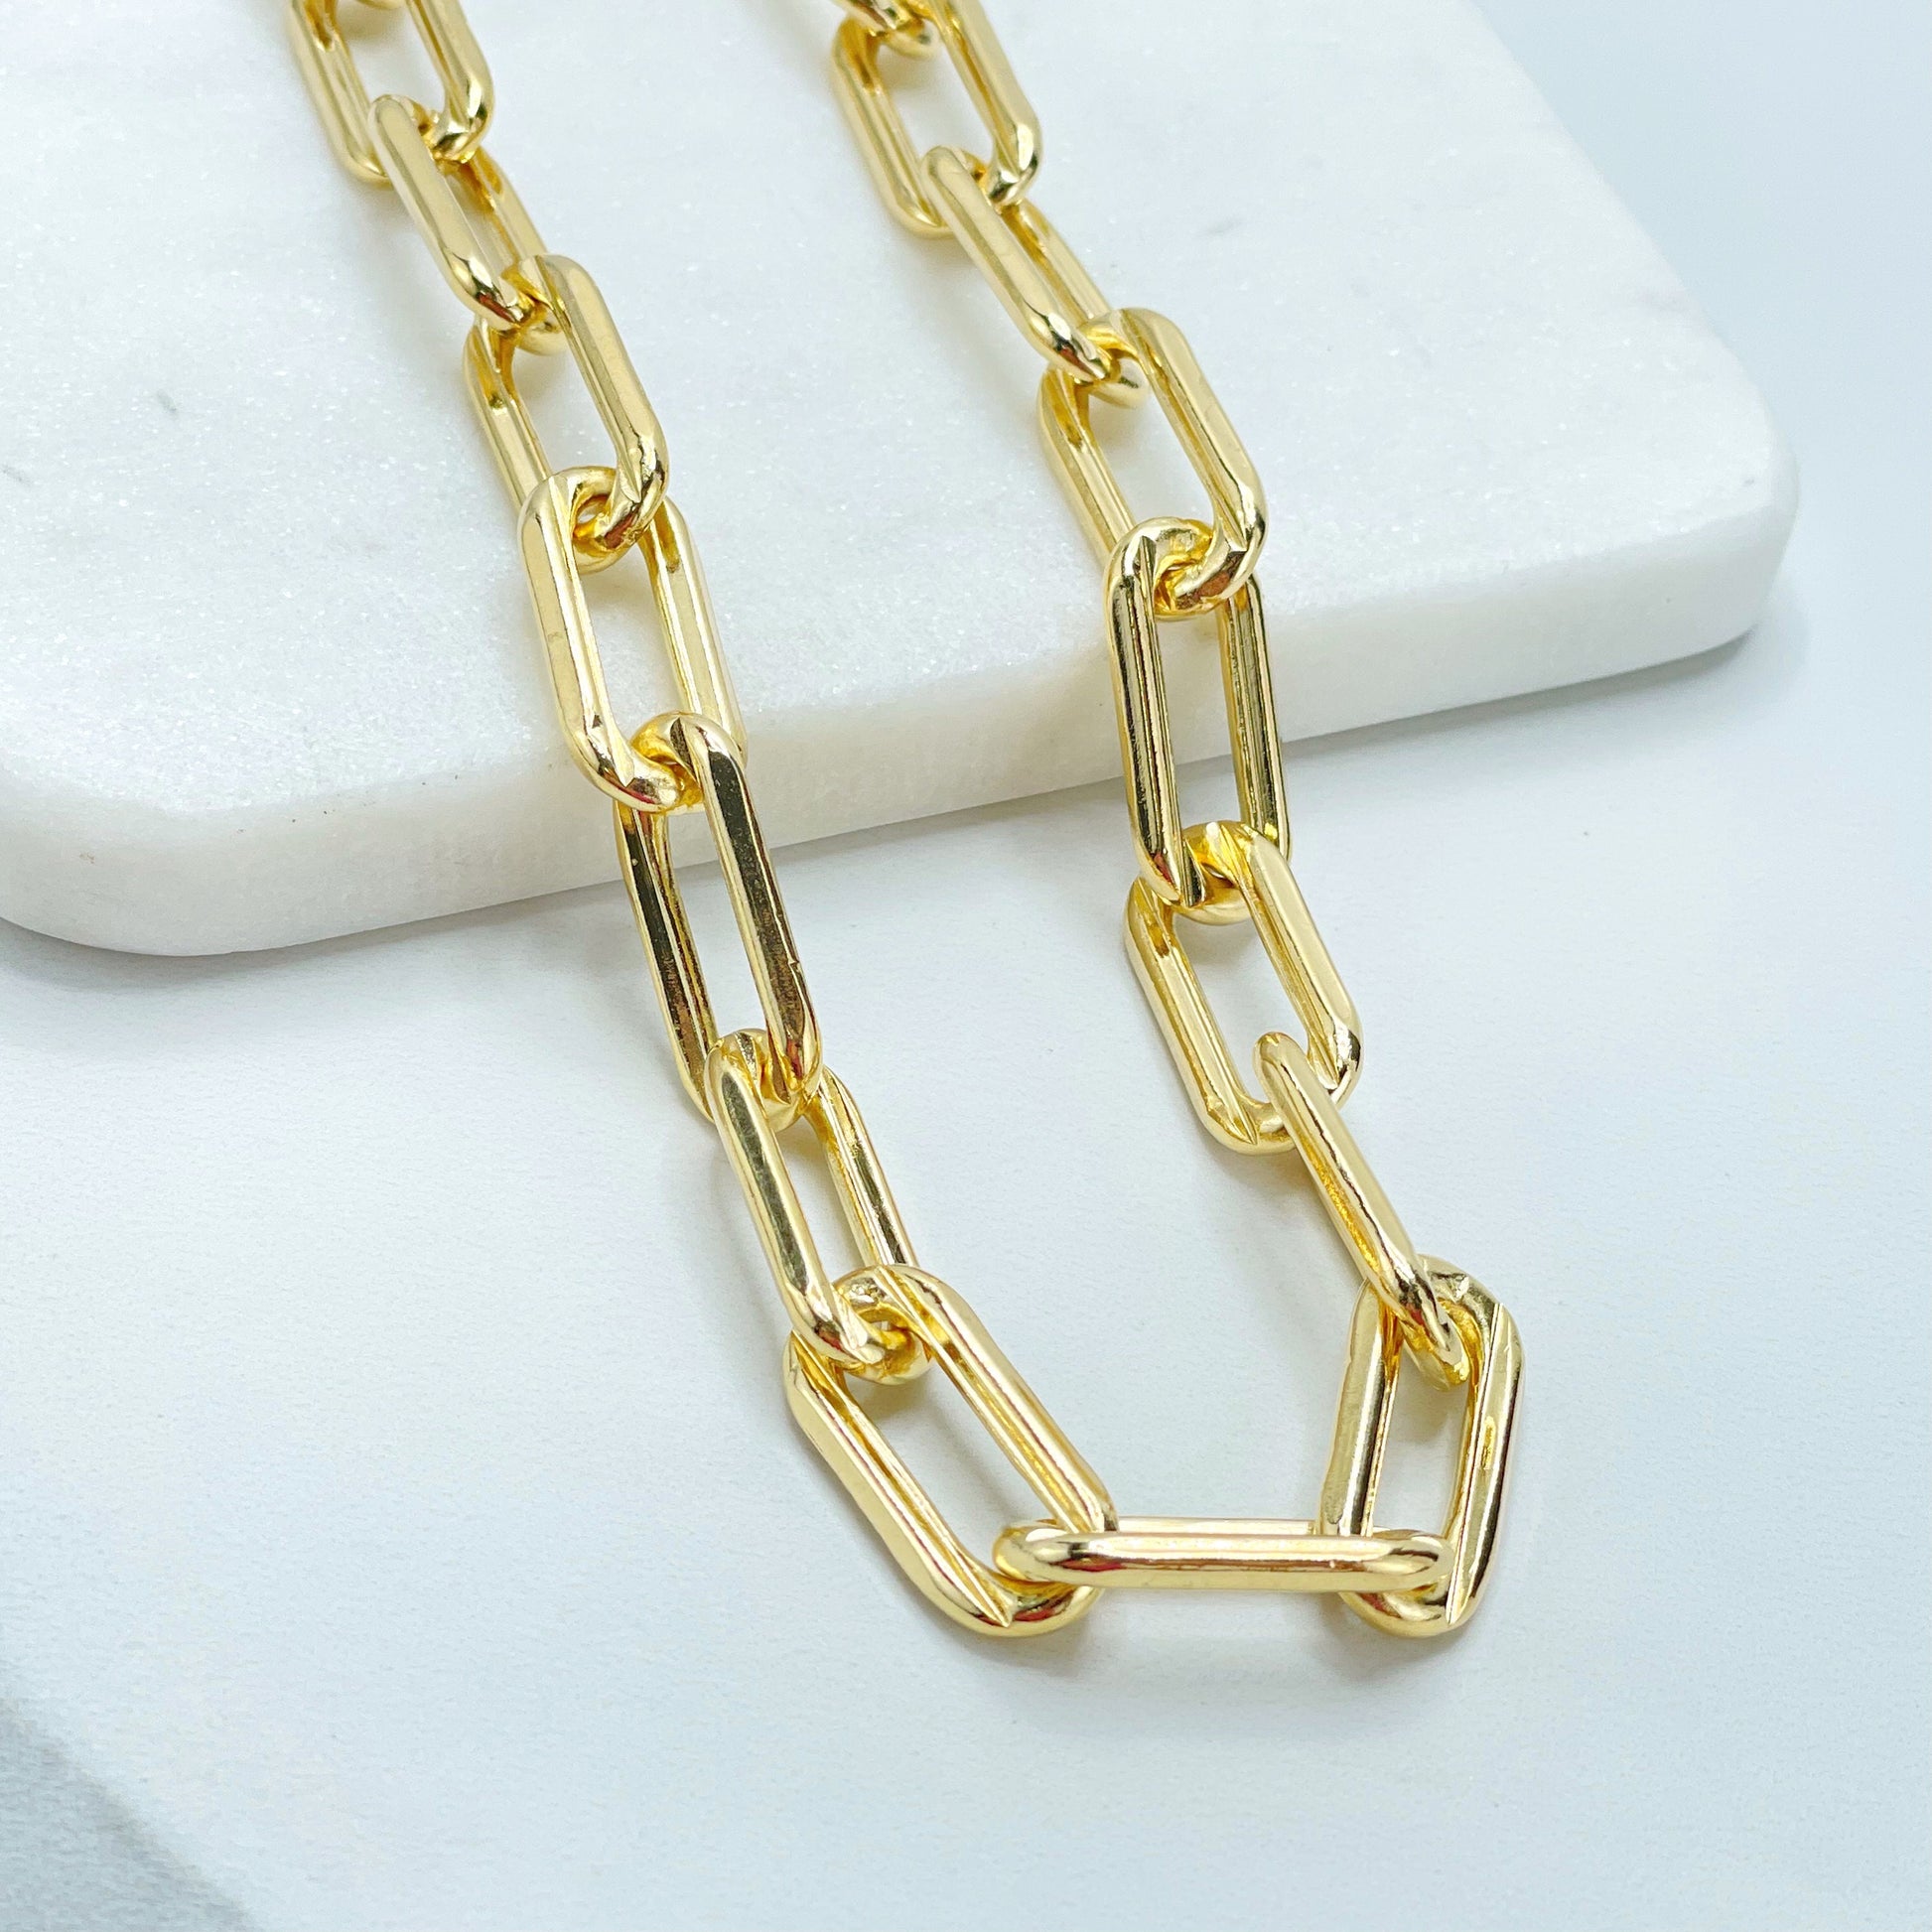 18k Gold Filled 9mm PaperClip Link Bracelet Wholesale Jewelry Supplies